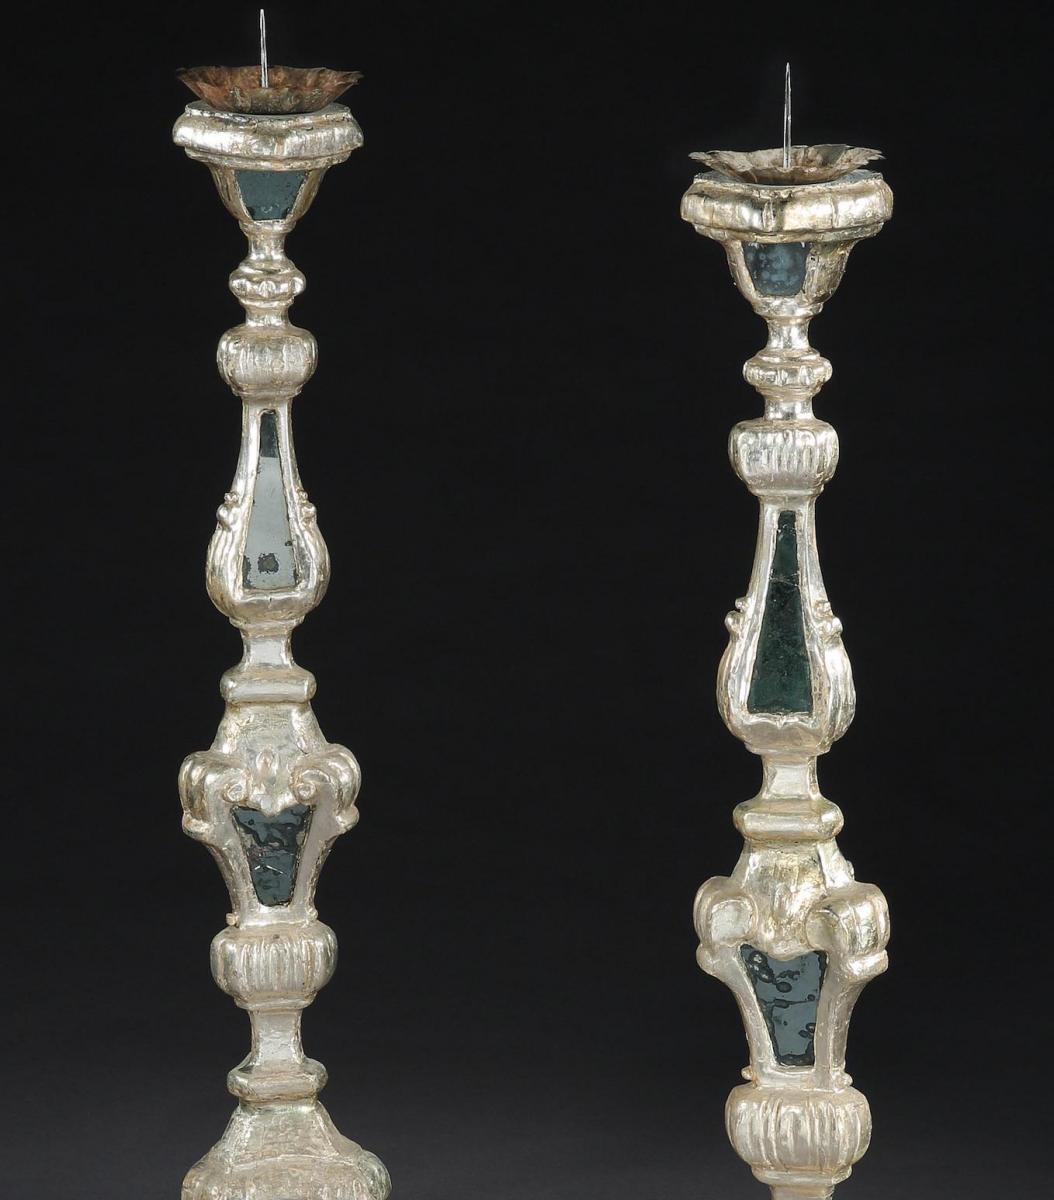 Torcheres Candlestands Pair Silver-Gilt Mirror Plate Italian Rococo